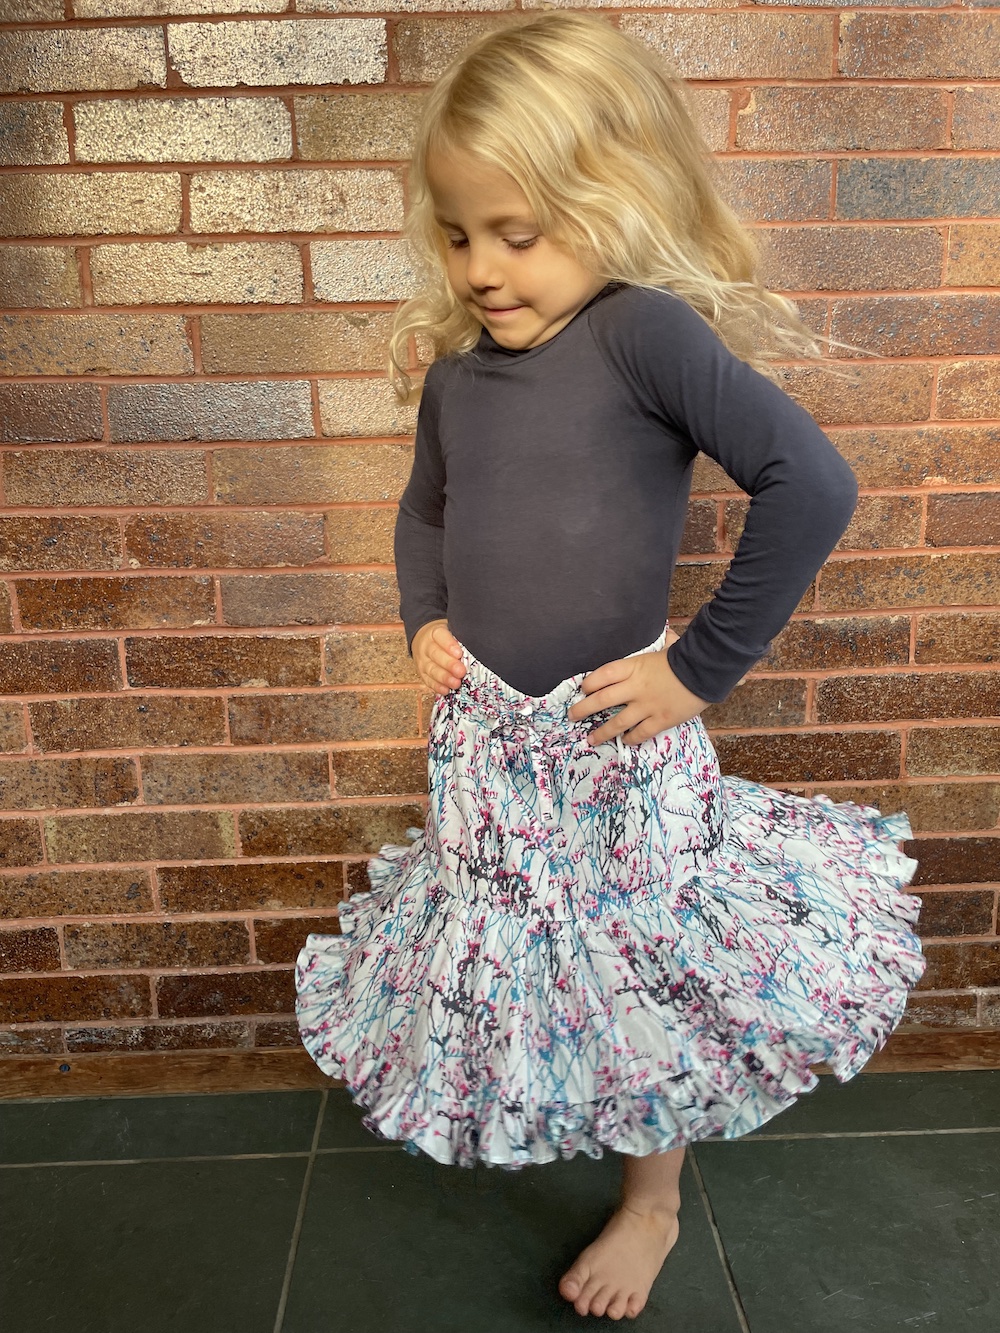 Evergreen Skirt pattern from Project Run & Play sewn by Skirt Fixation